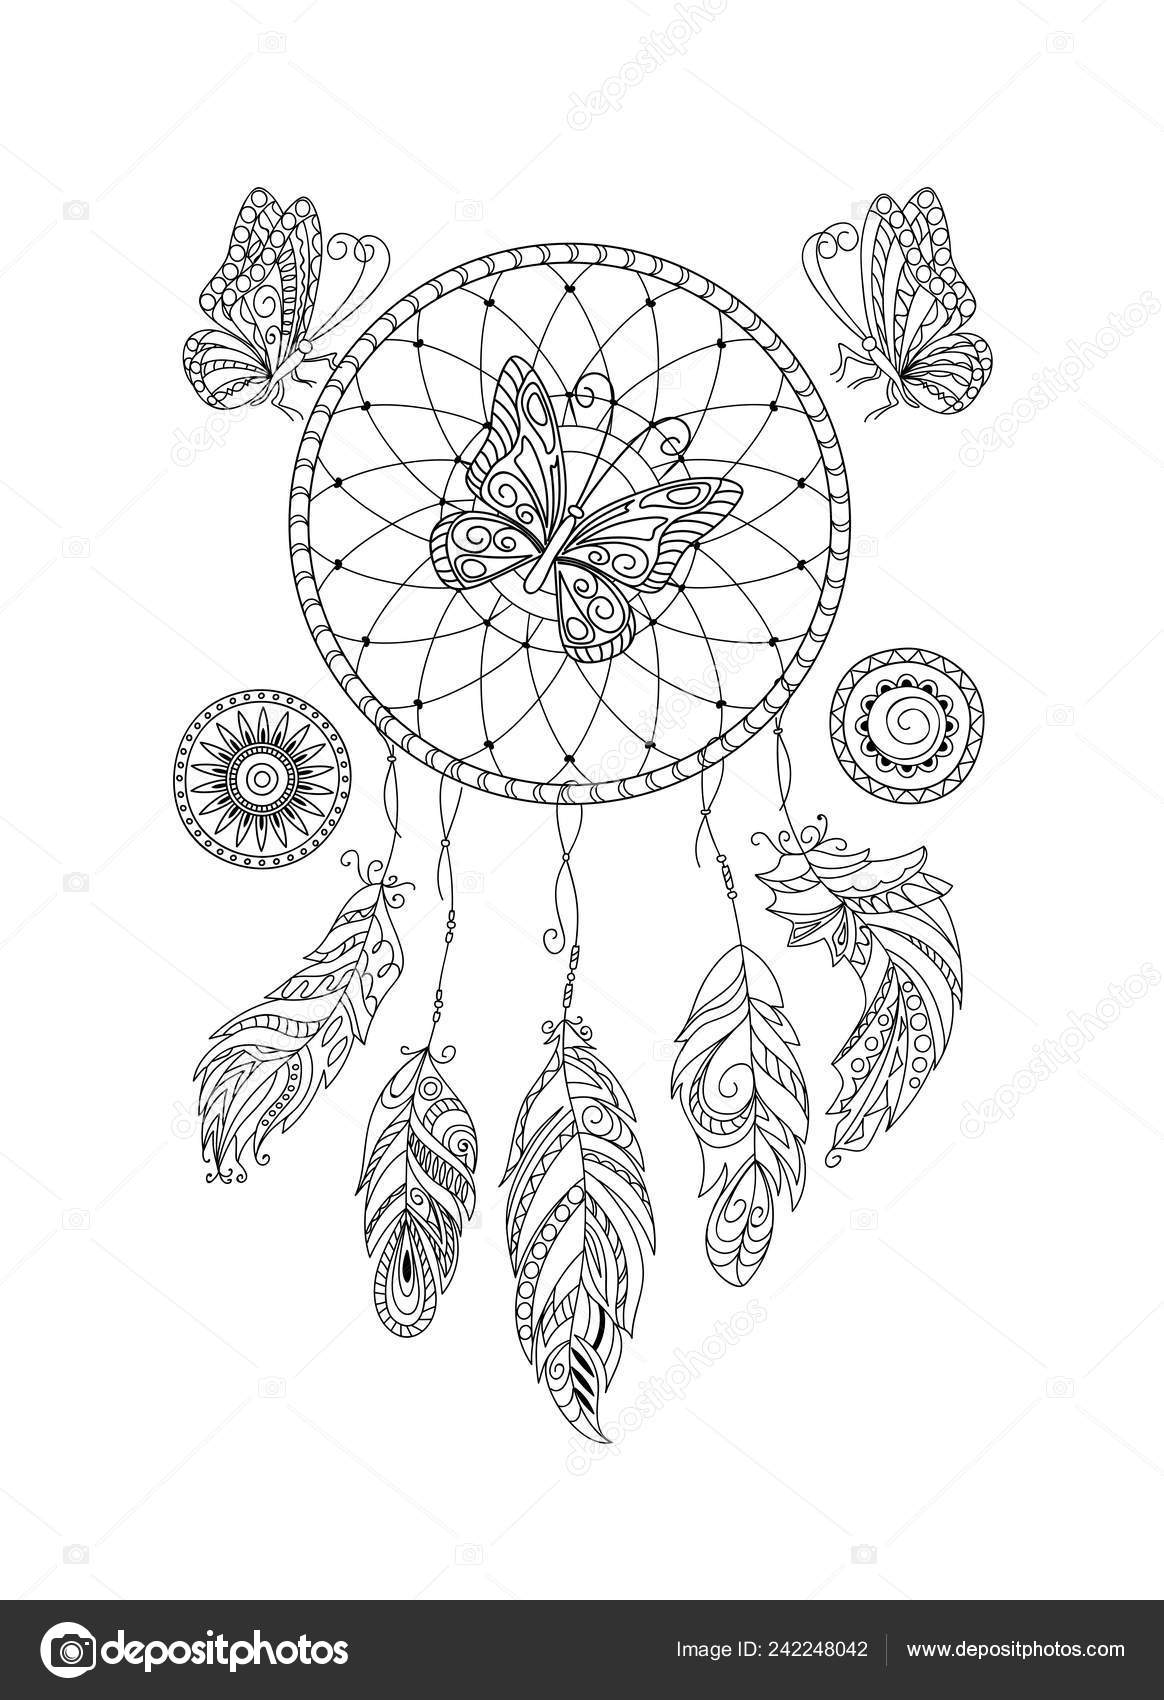 Download Coloring Page Dreamcatcher Patterned Feathers Butterflies Adult Antistress Coloring Book Stock Vector Image By C Sliplee 242248042